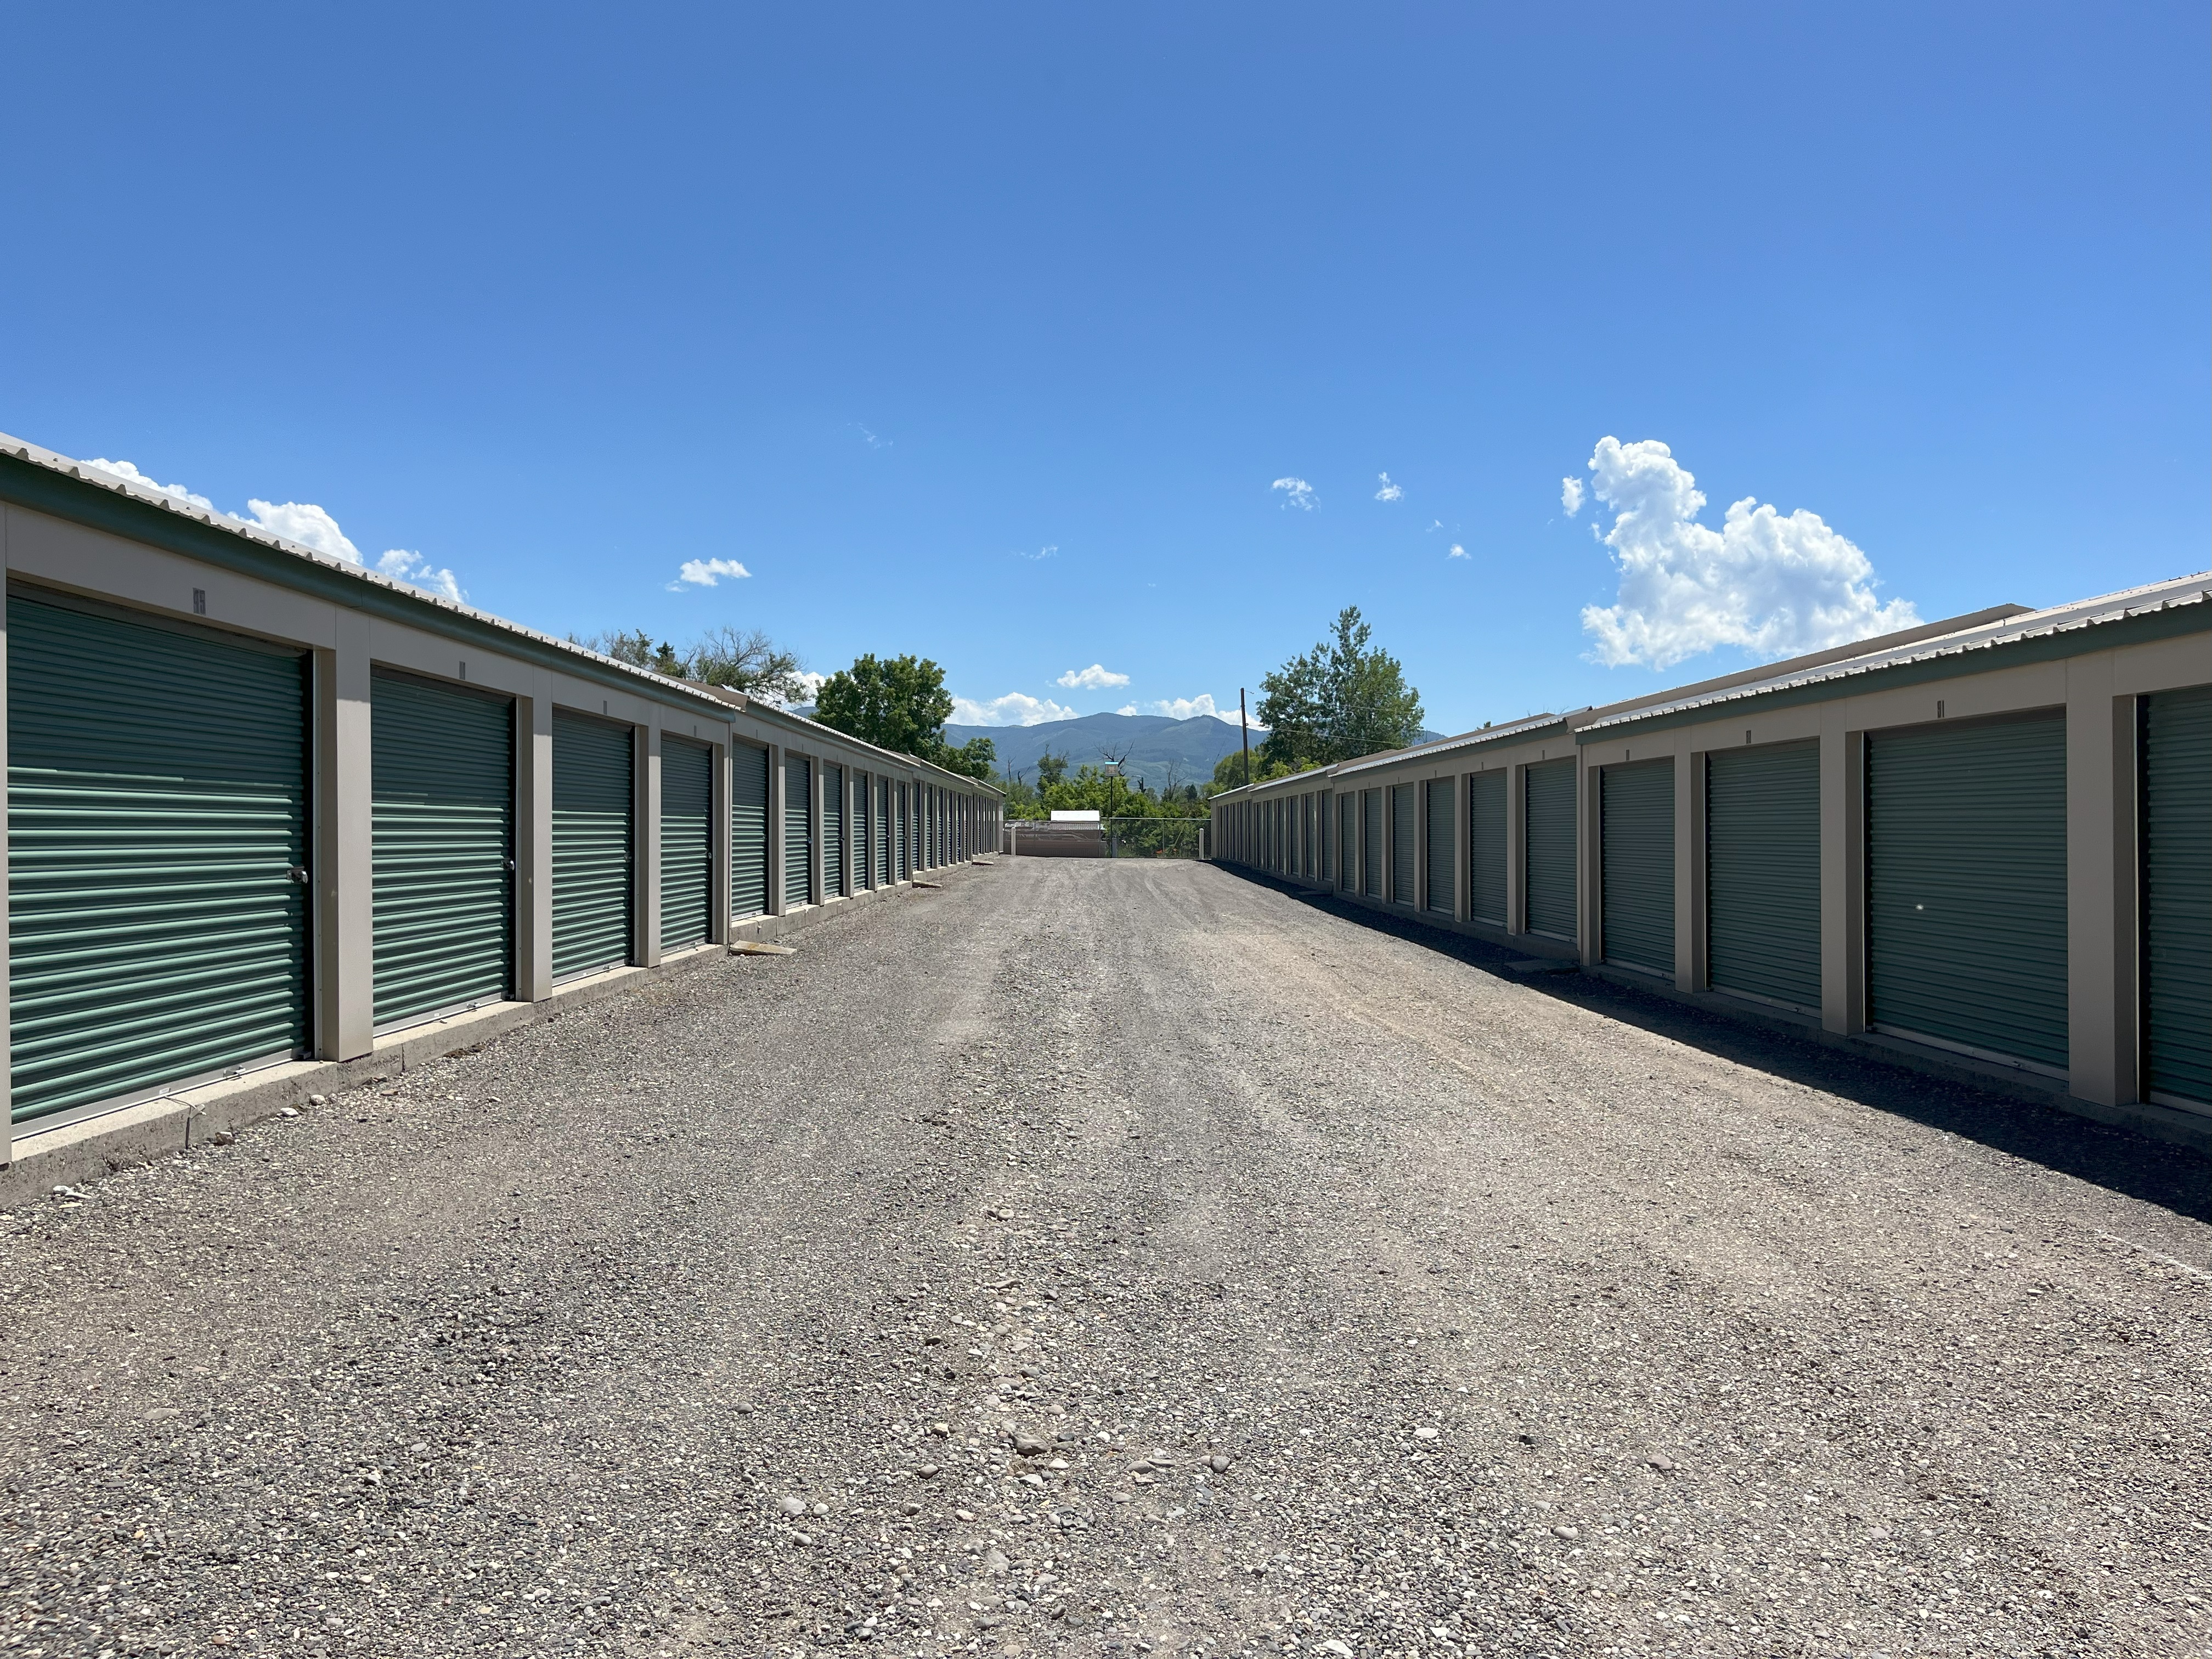 wide gravel drive at Alpine Storage MT with tan buildings and green garage doors